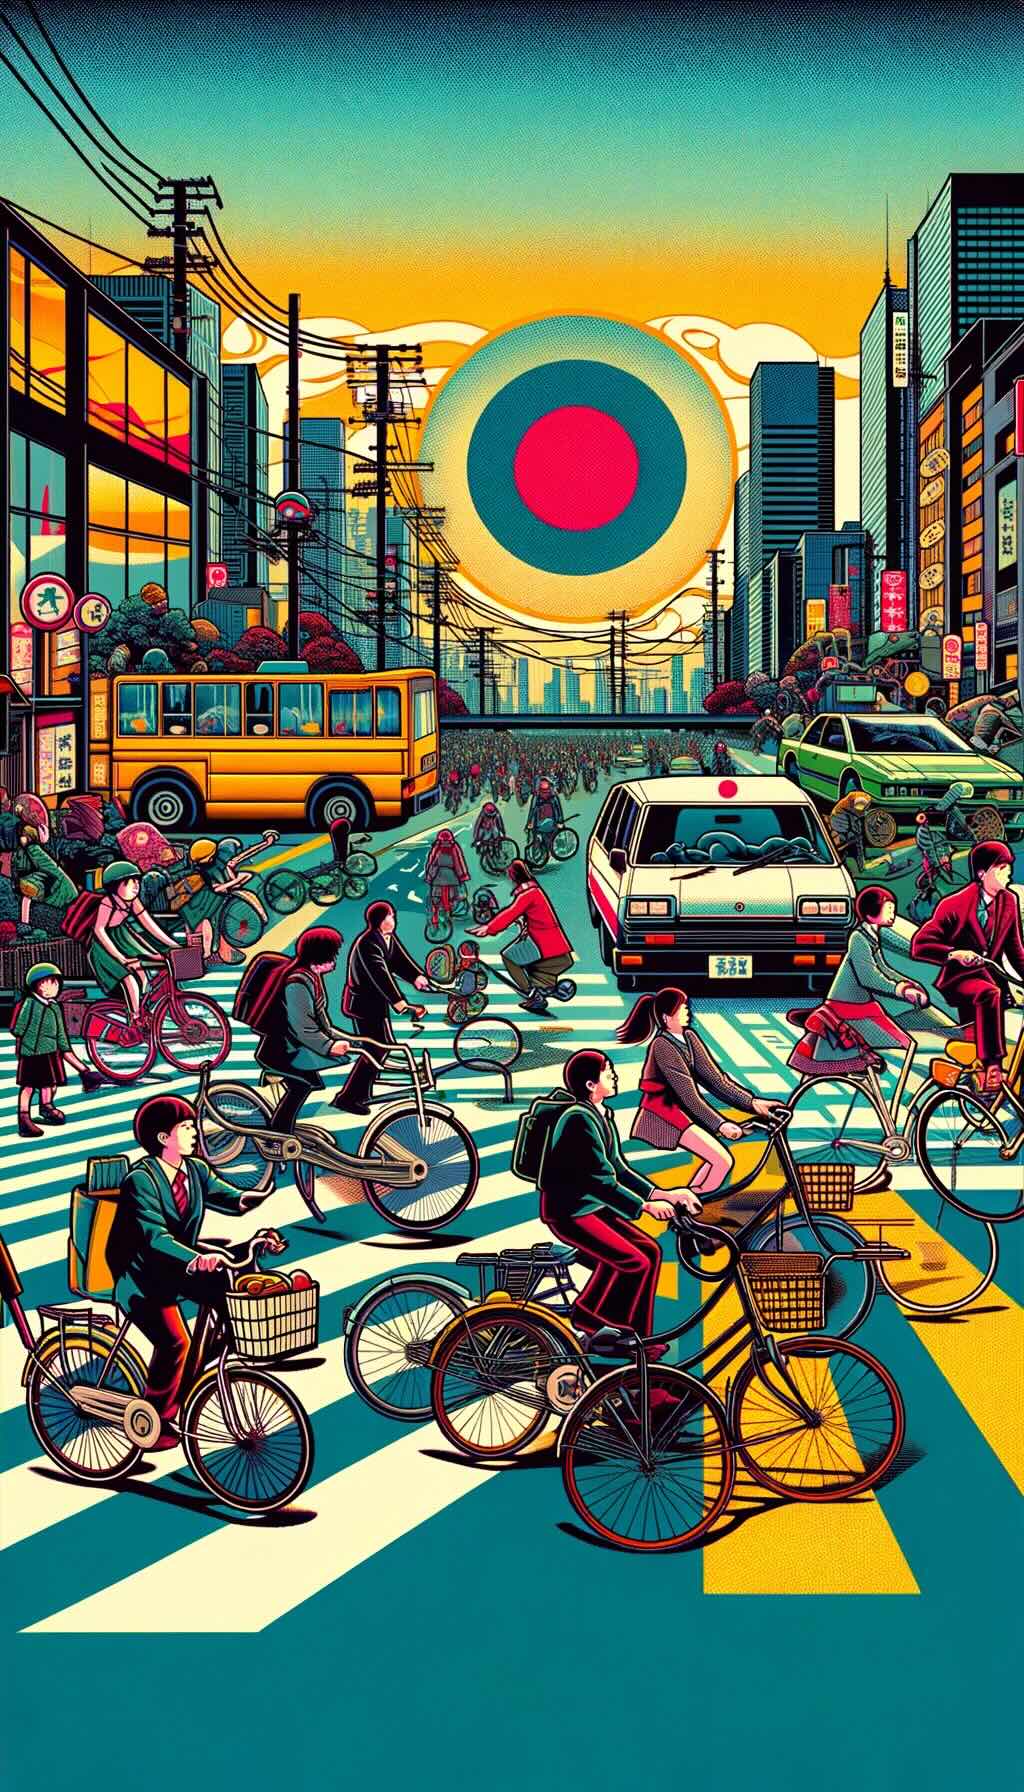 Cultural significance of cycling in Japan, showcasing how it is interwoven into the daily lives of people and the landscapes they traverse represent the importance of bicycles as symbols of efficiency, environmental consciousness, and health in Japanese culture